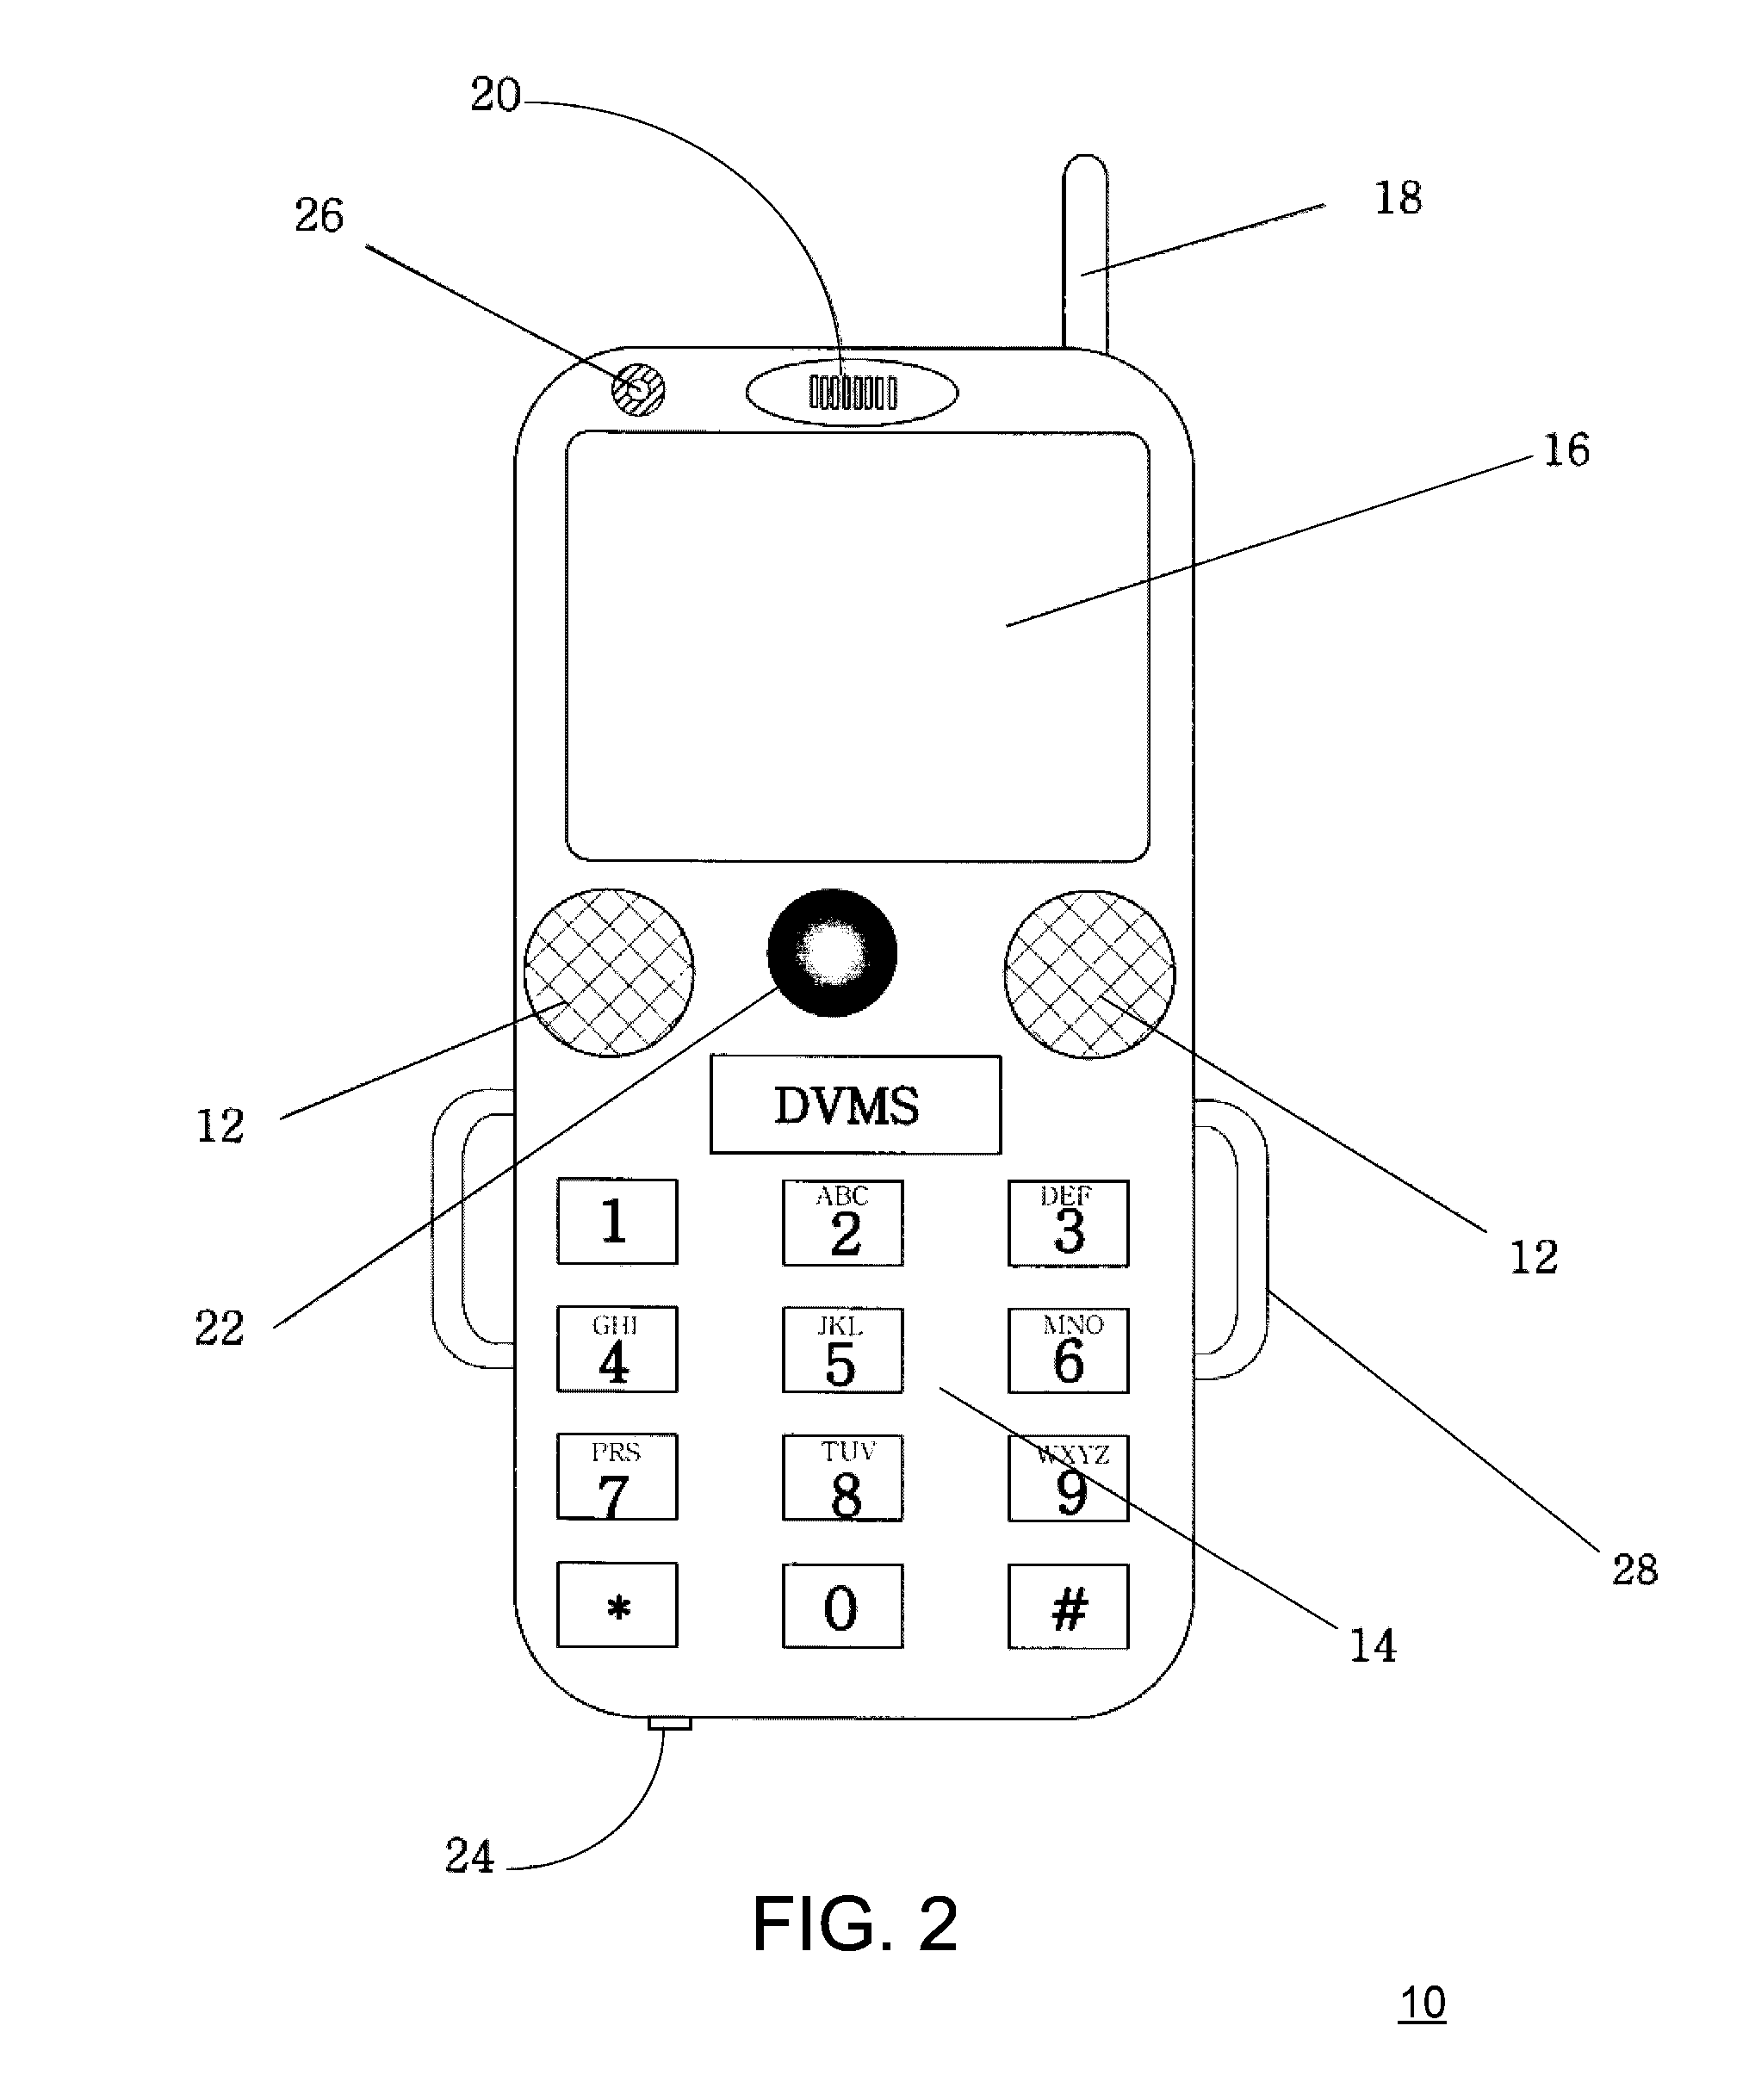 Audio-video communication system for receiving person at entrance